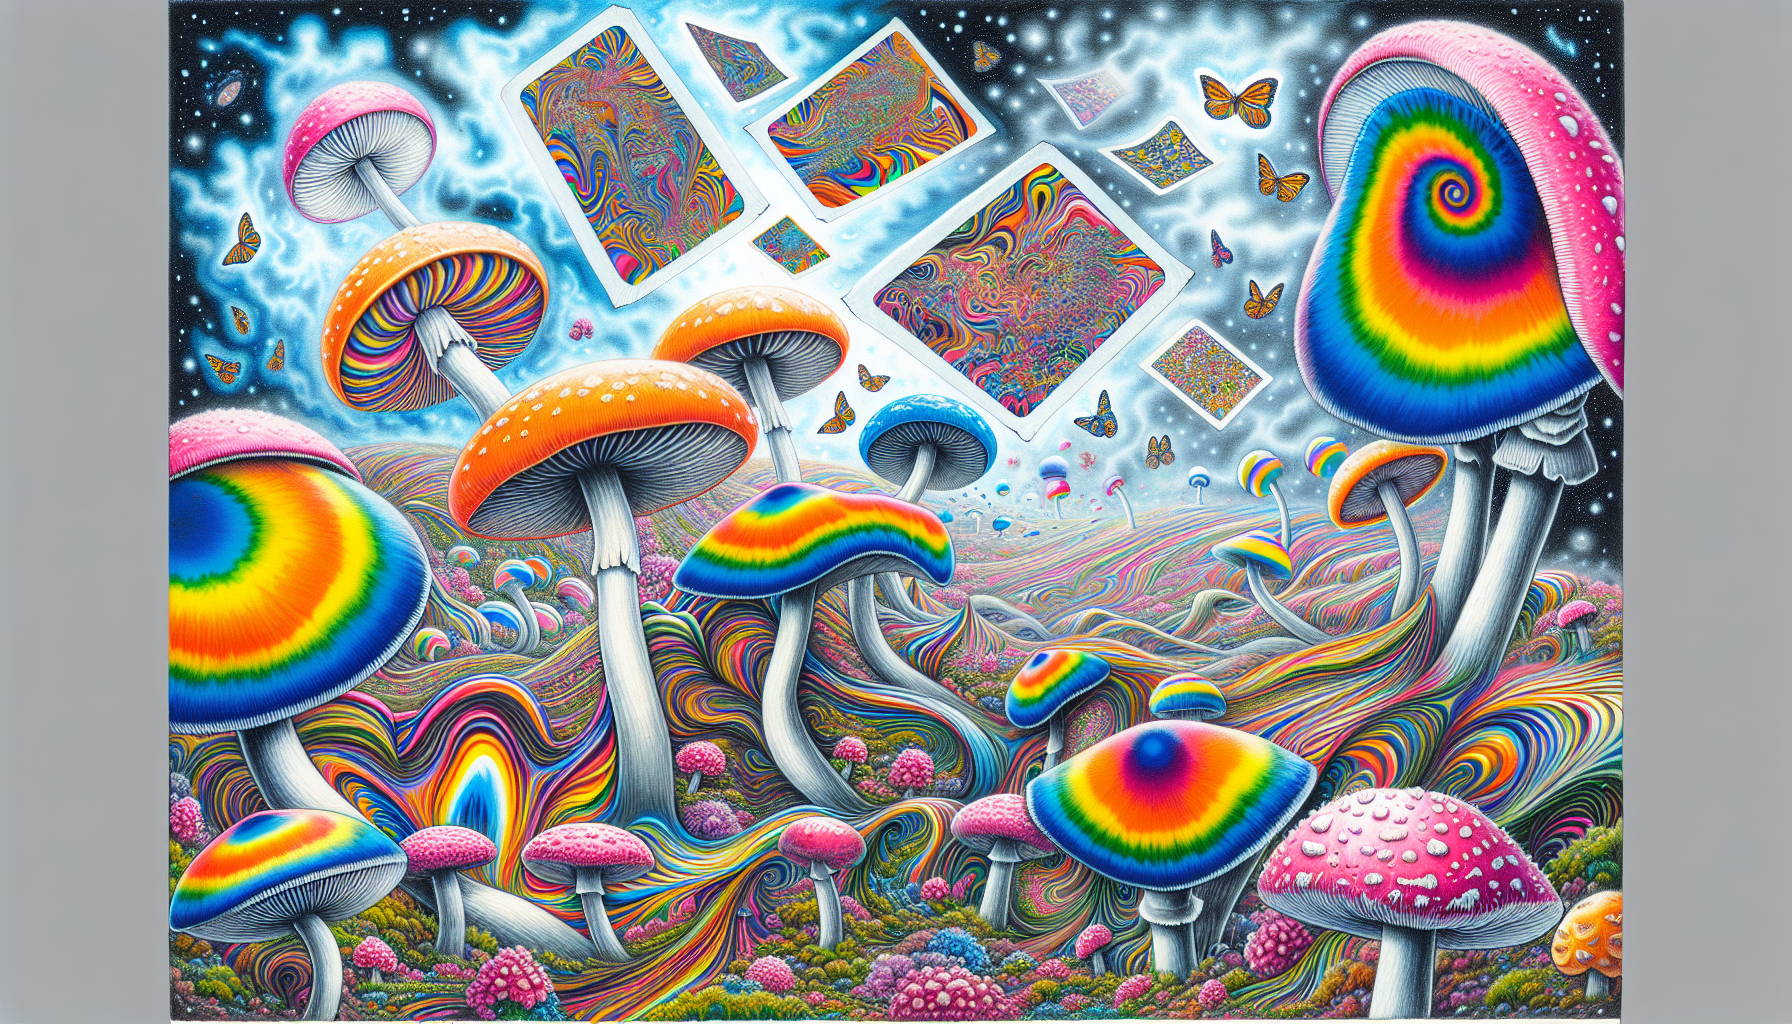 Illustration of psychedelic substances